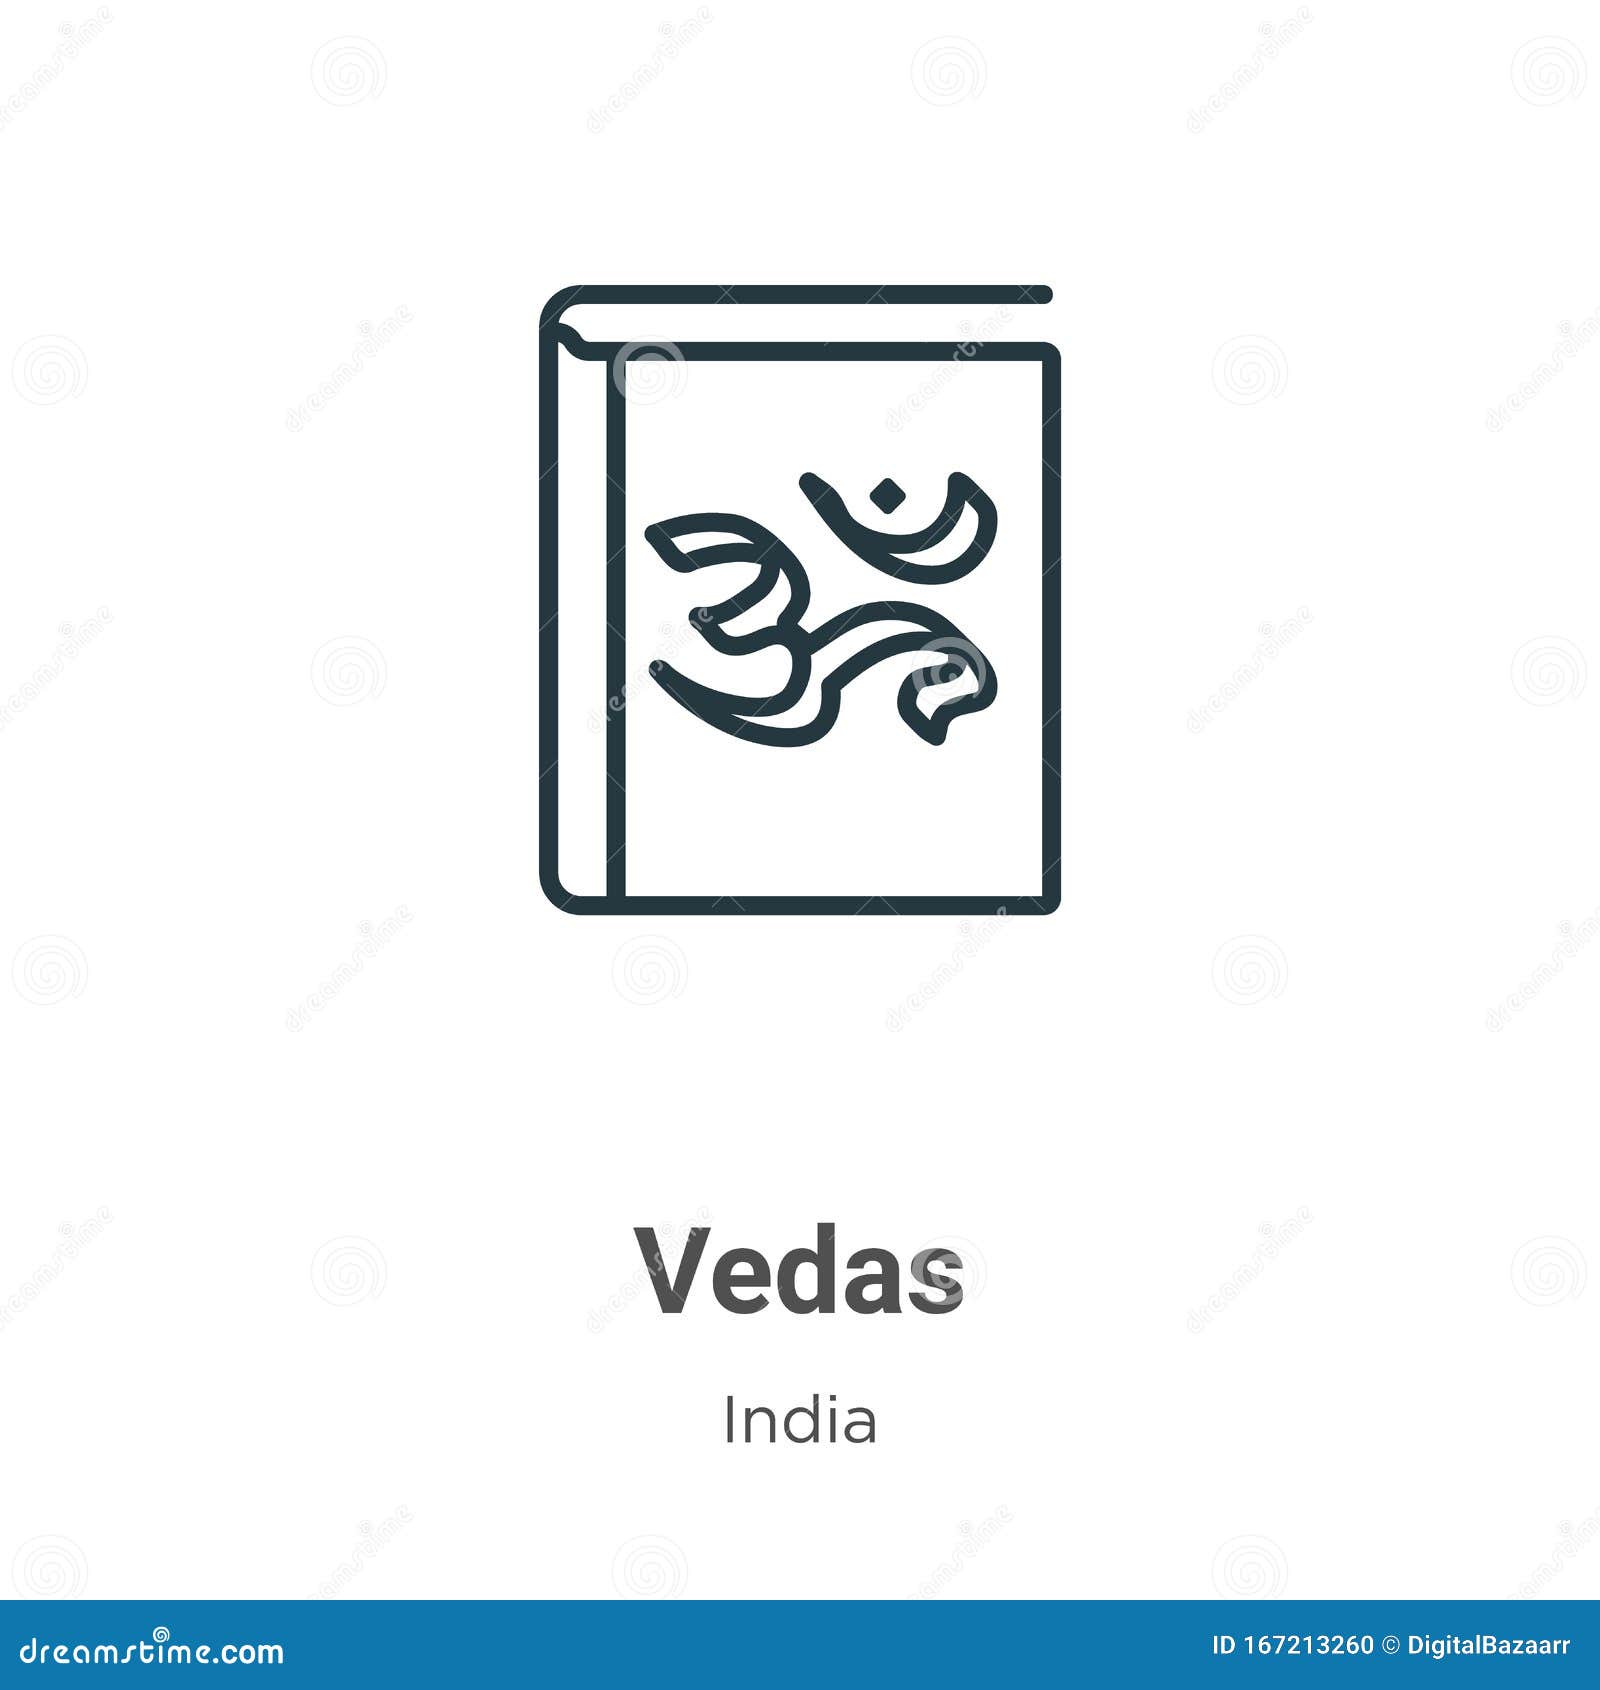 vedas outline  icon. thin line black vedas icon, flat  simple   from editable india concept